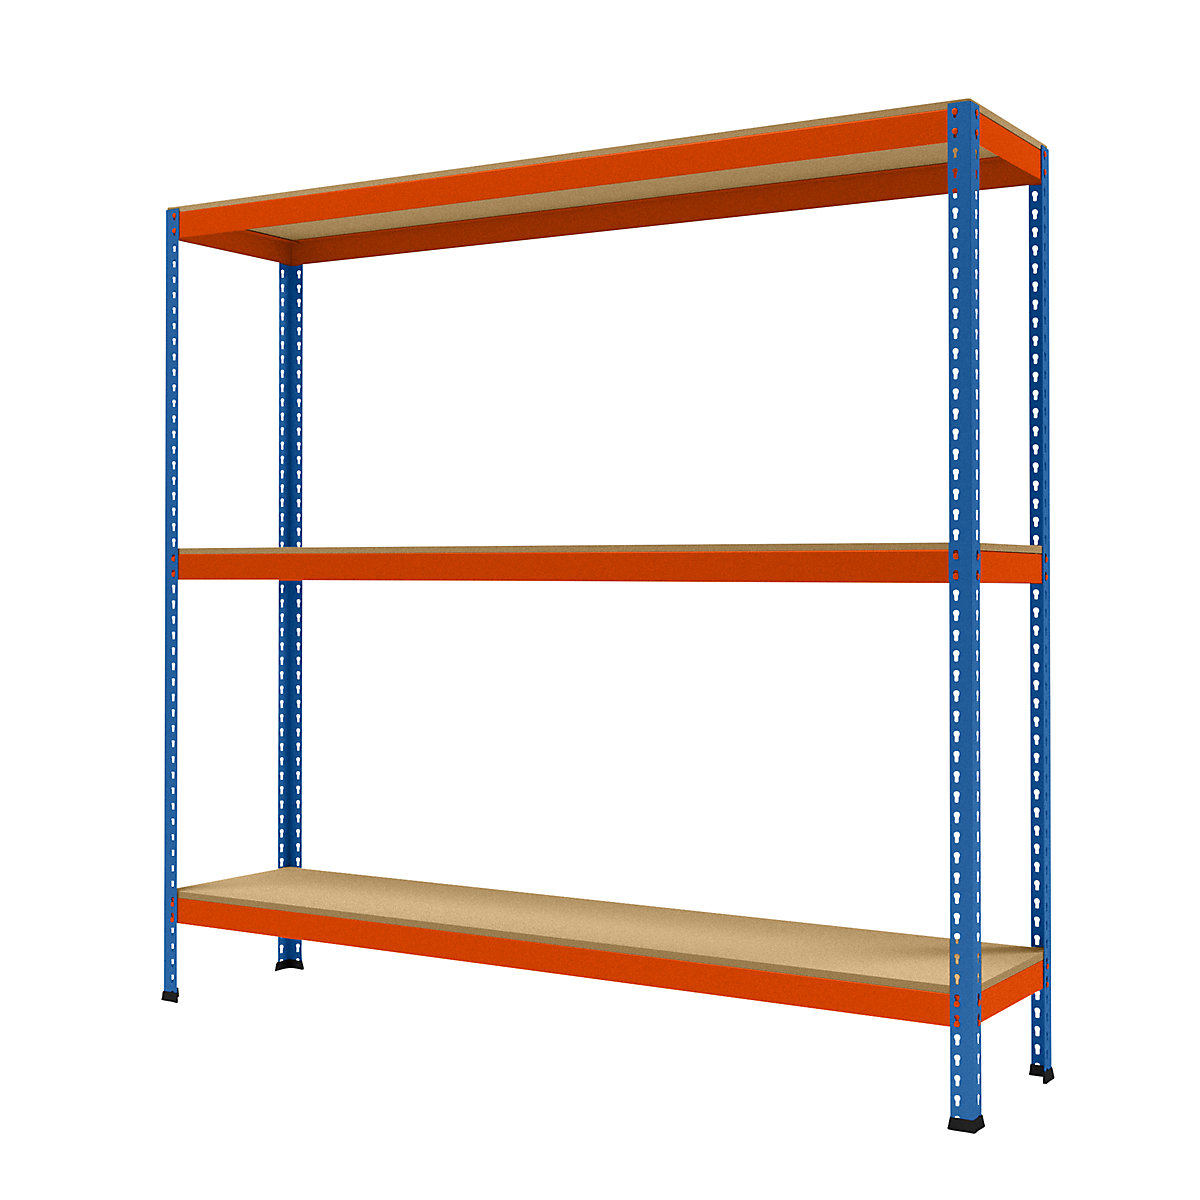 Wide span heavy duty shelving, height 1981 mm, overall depth 468 mm, width 2146 mm